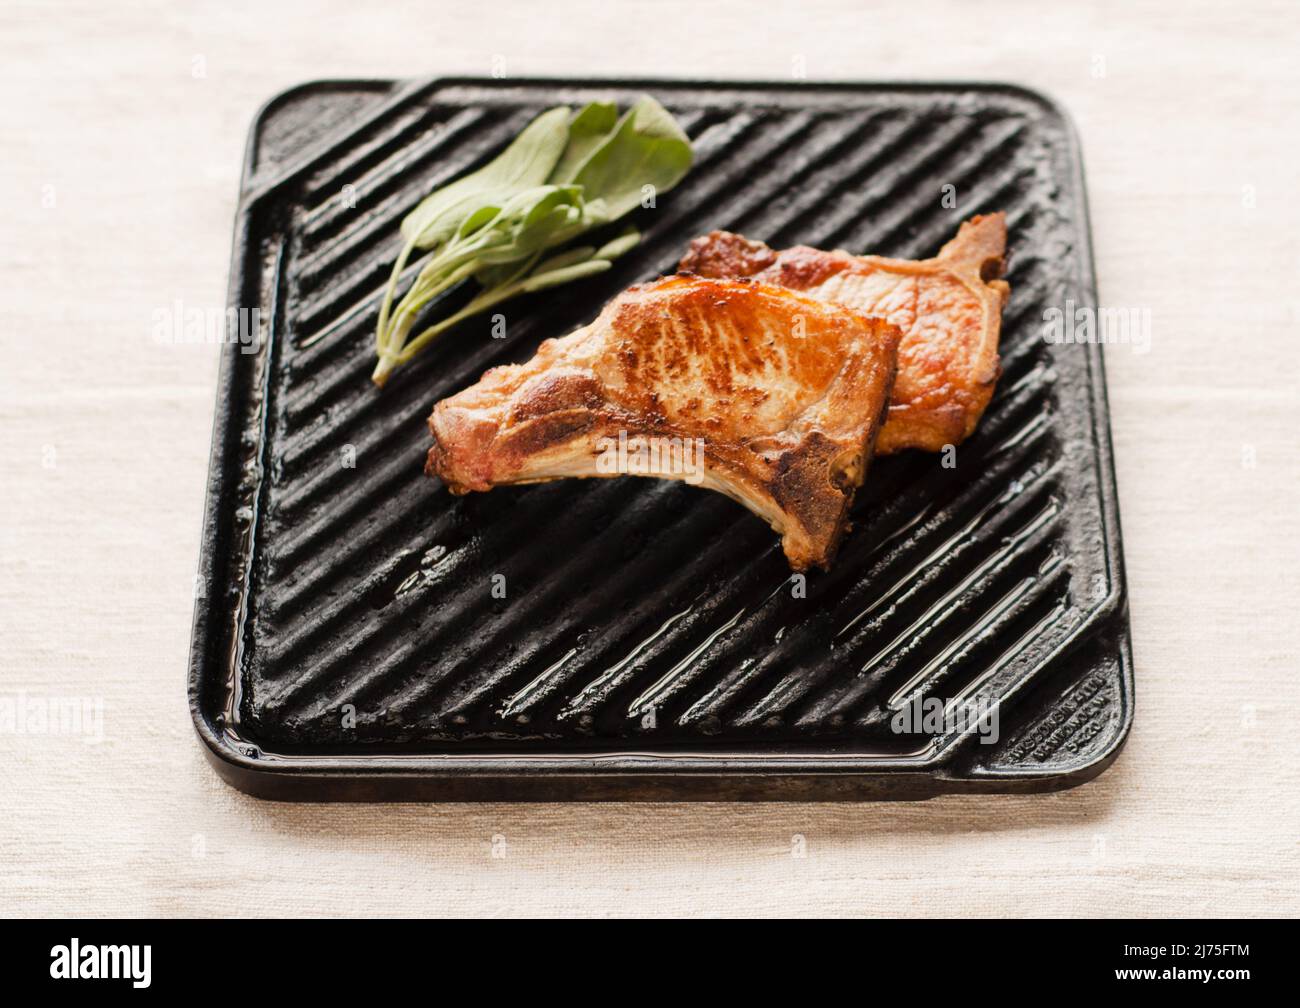 Pork chop on a grilling pan Stock Photo